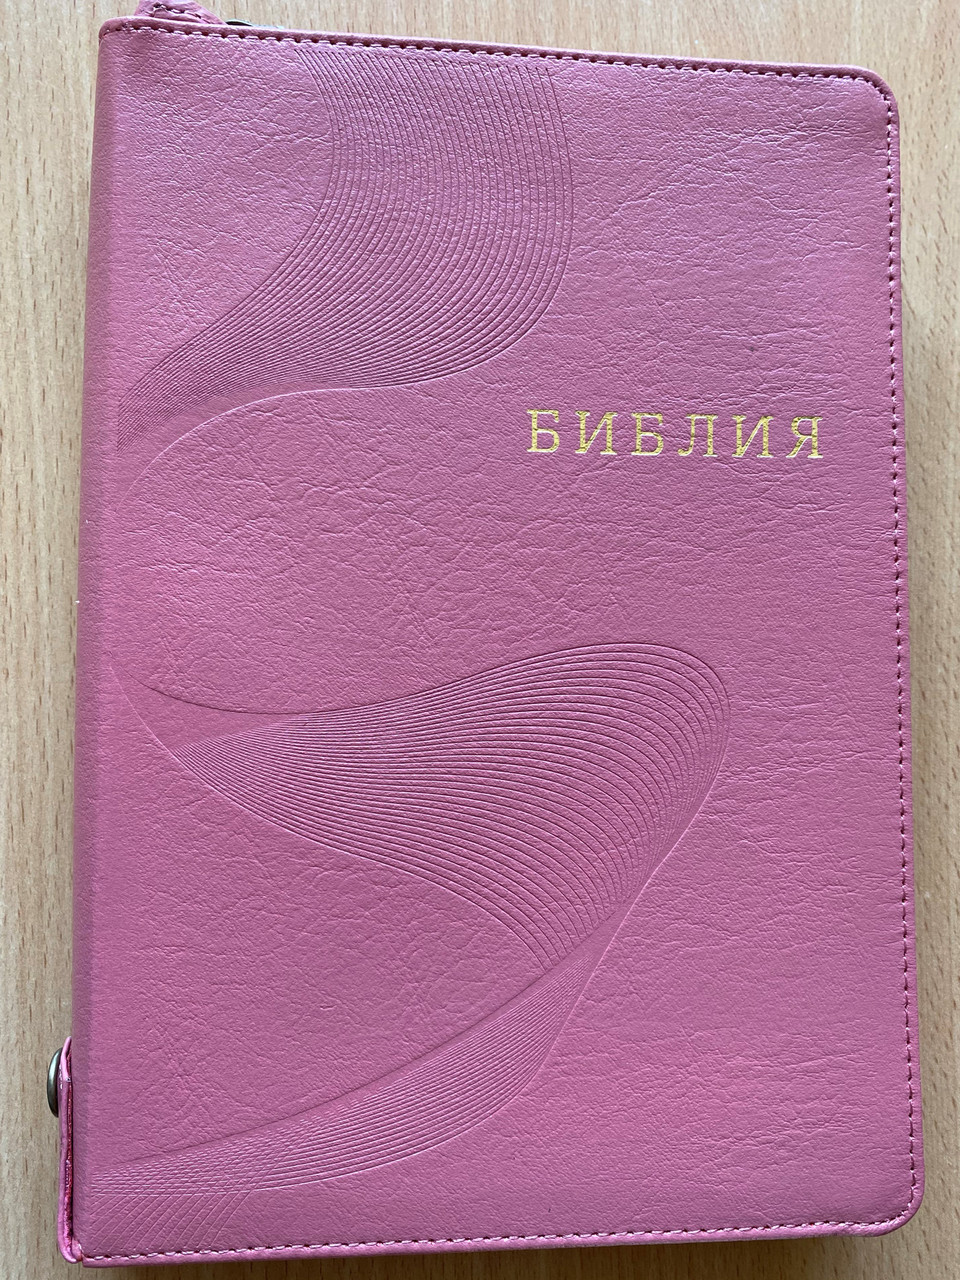 https://cdn10.bigcommerce.com/s-62bdpkt7pb/products/0/images/268981/Pink_Russian_Bible_with_family_pages_gift_wedding_children_events_Pink_Leather_bound_with_zippe_indexes_buttonr_and_golden_edges_Mid_Size_R_1__00729.1678101950.1280.1280.JPG?c=2&_gl=1*1wx24yl*_ga*MjA2NTIxMjE2MC4xNTkwNTEyNTMy*_ga_WS2VZYPC6G*MTY3ODA5OTkwMy43OTEuMS4xNjc4MTAxNTIyLjYwLjAuMA..